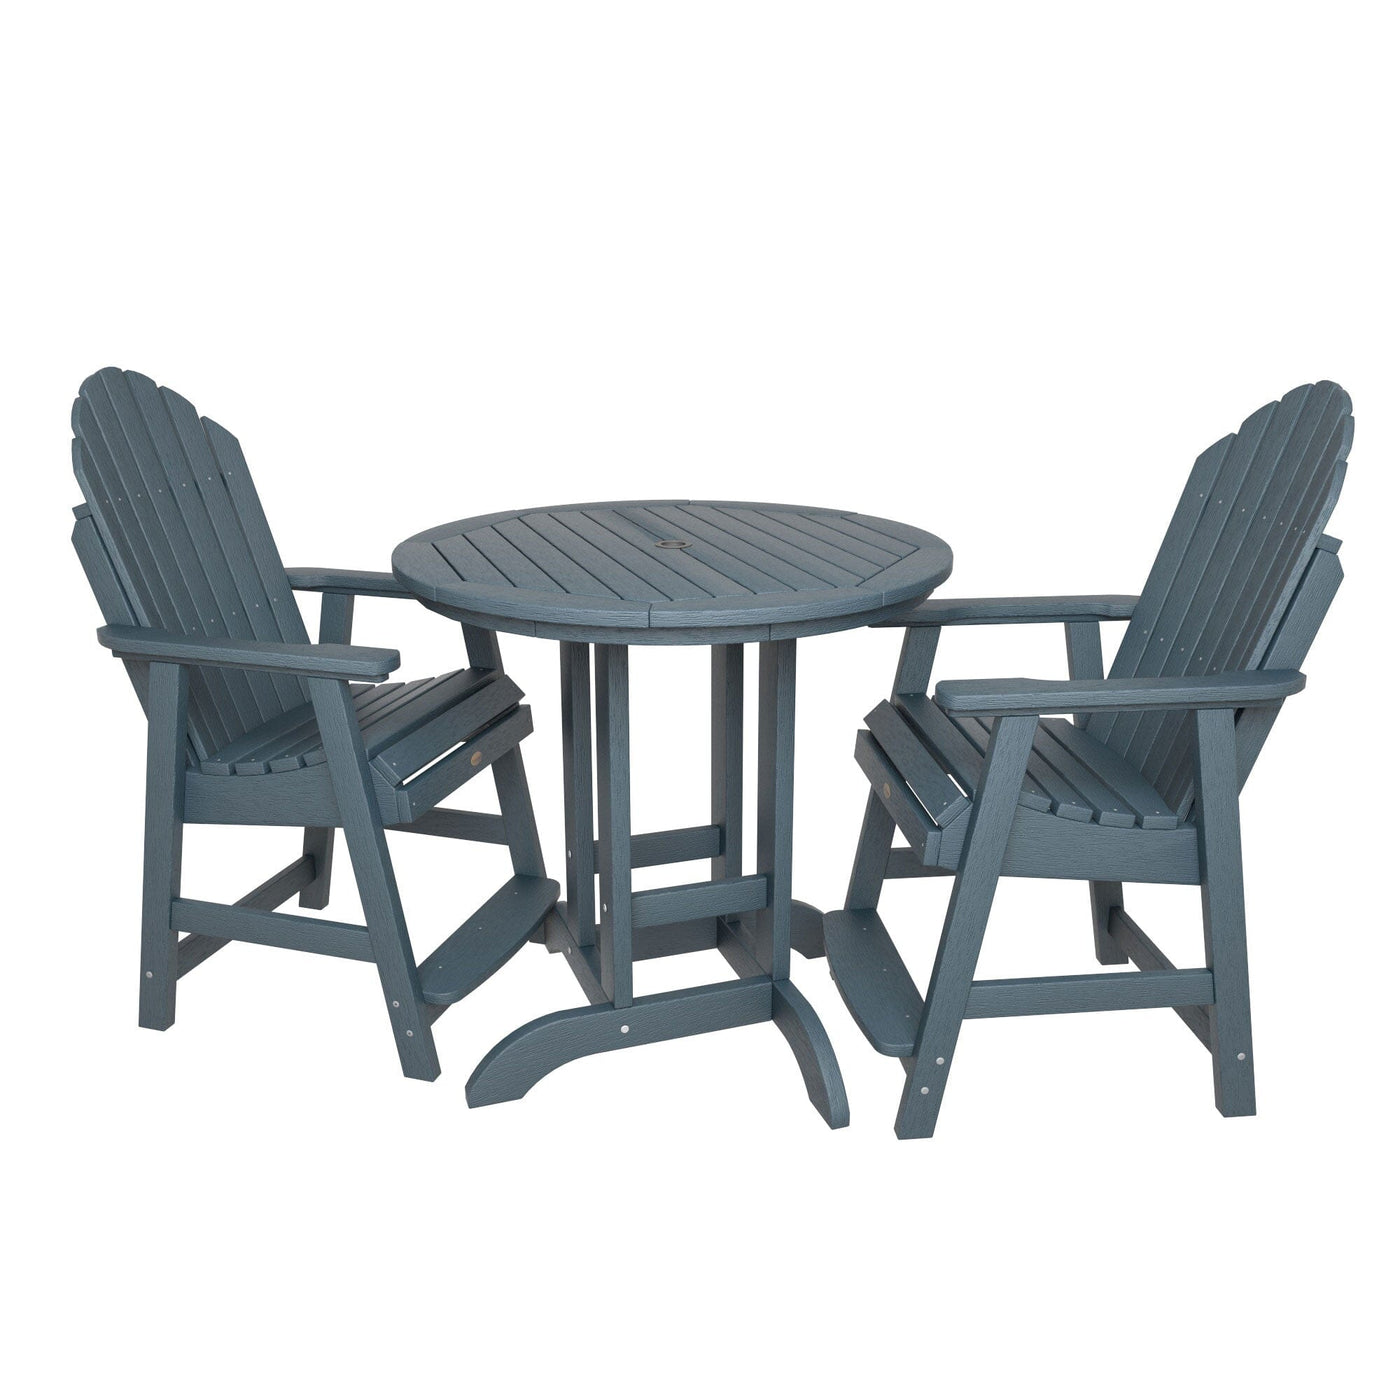 Hamilton 3pc 36in Round Dining Set - Counter Height Dining Highwood USA Nantucket Blue 